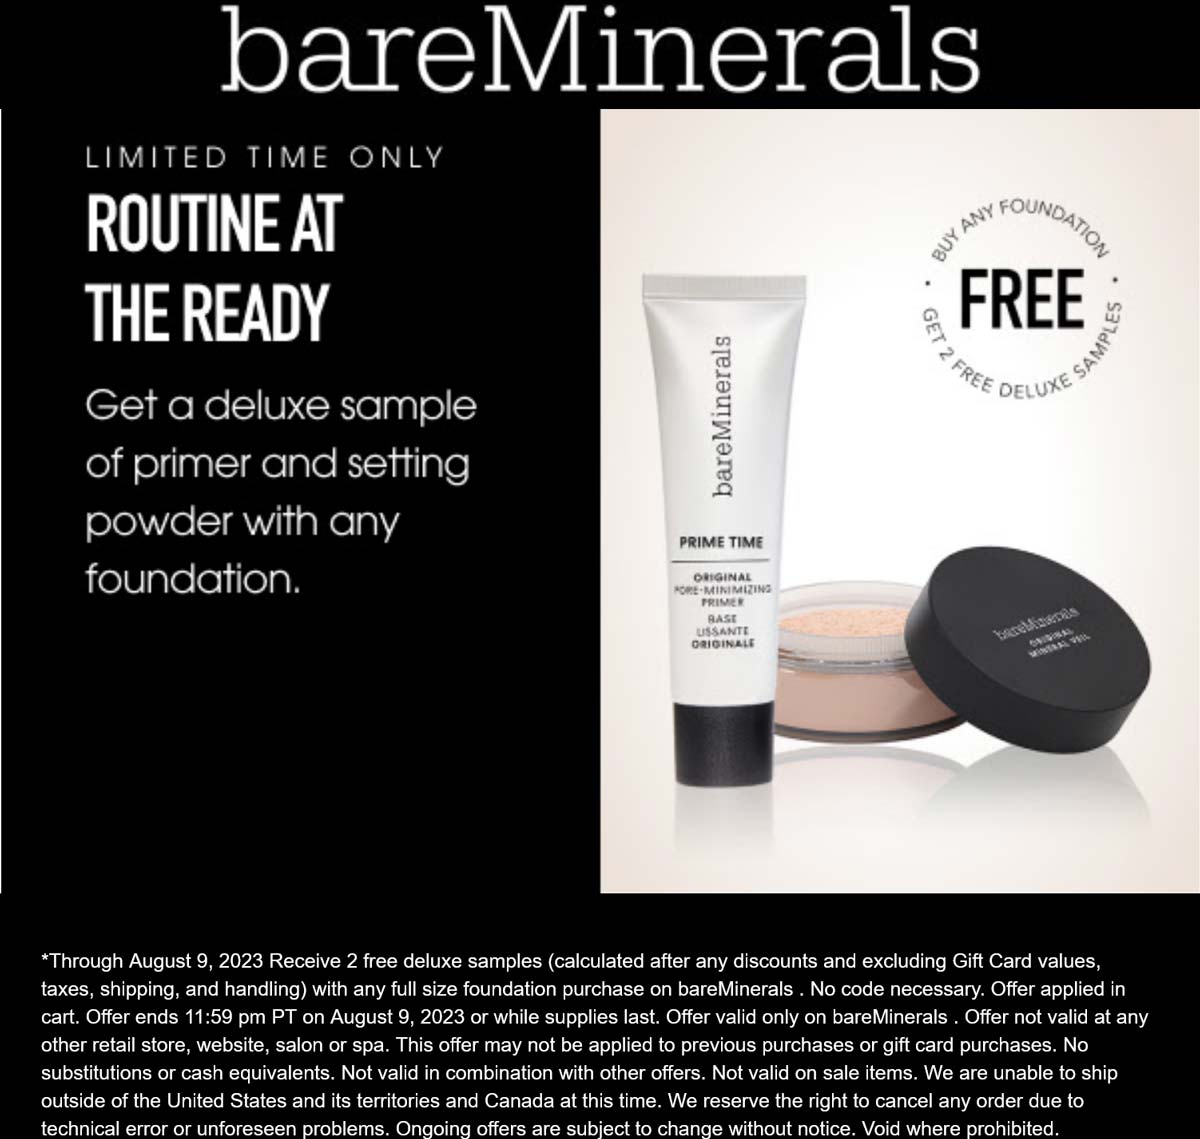 bareMinerals stores Coupon  Free primer & setting powder with your foundation at bareMinerals #bareminerals 